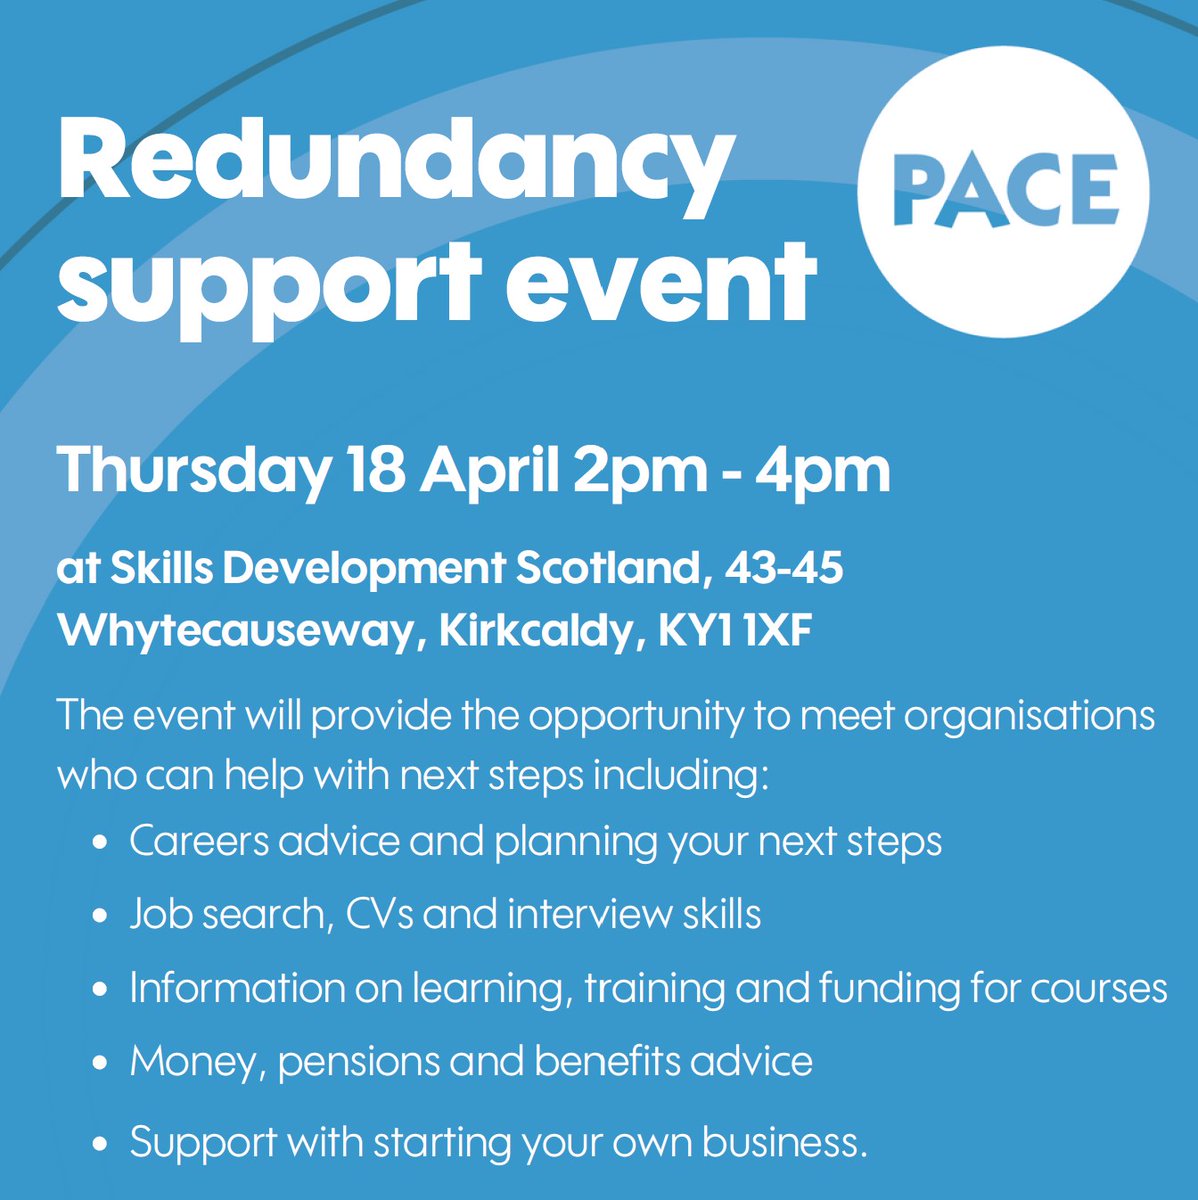 🔊 Are you facing redundancy? We will be on hand at the PACE redundancy support event this Thursday from 2pm-4pm at SDS in Kirkcaldy, providing advice about learning and training opportunities. @skillsdevscot